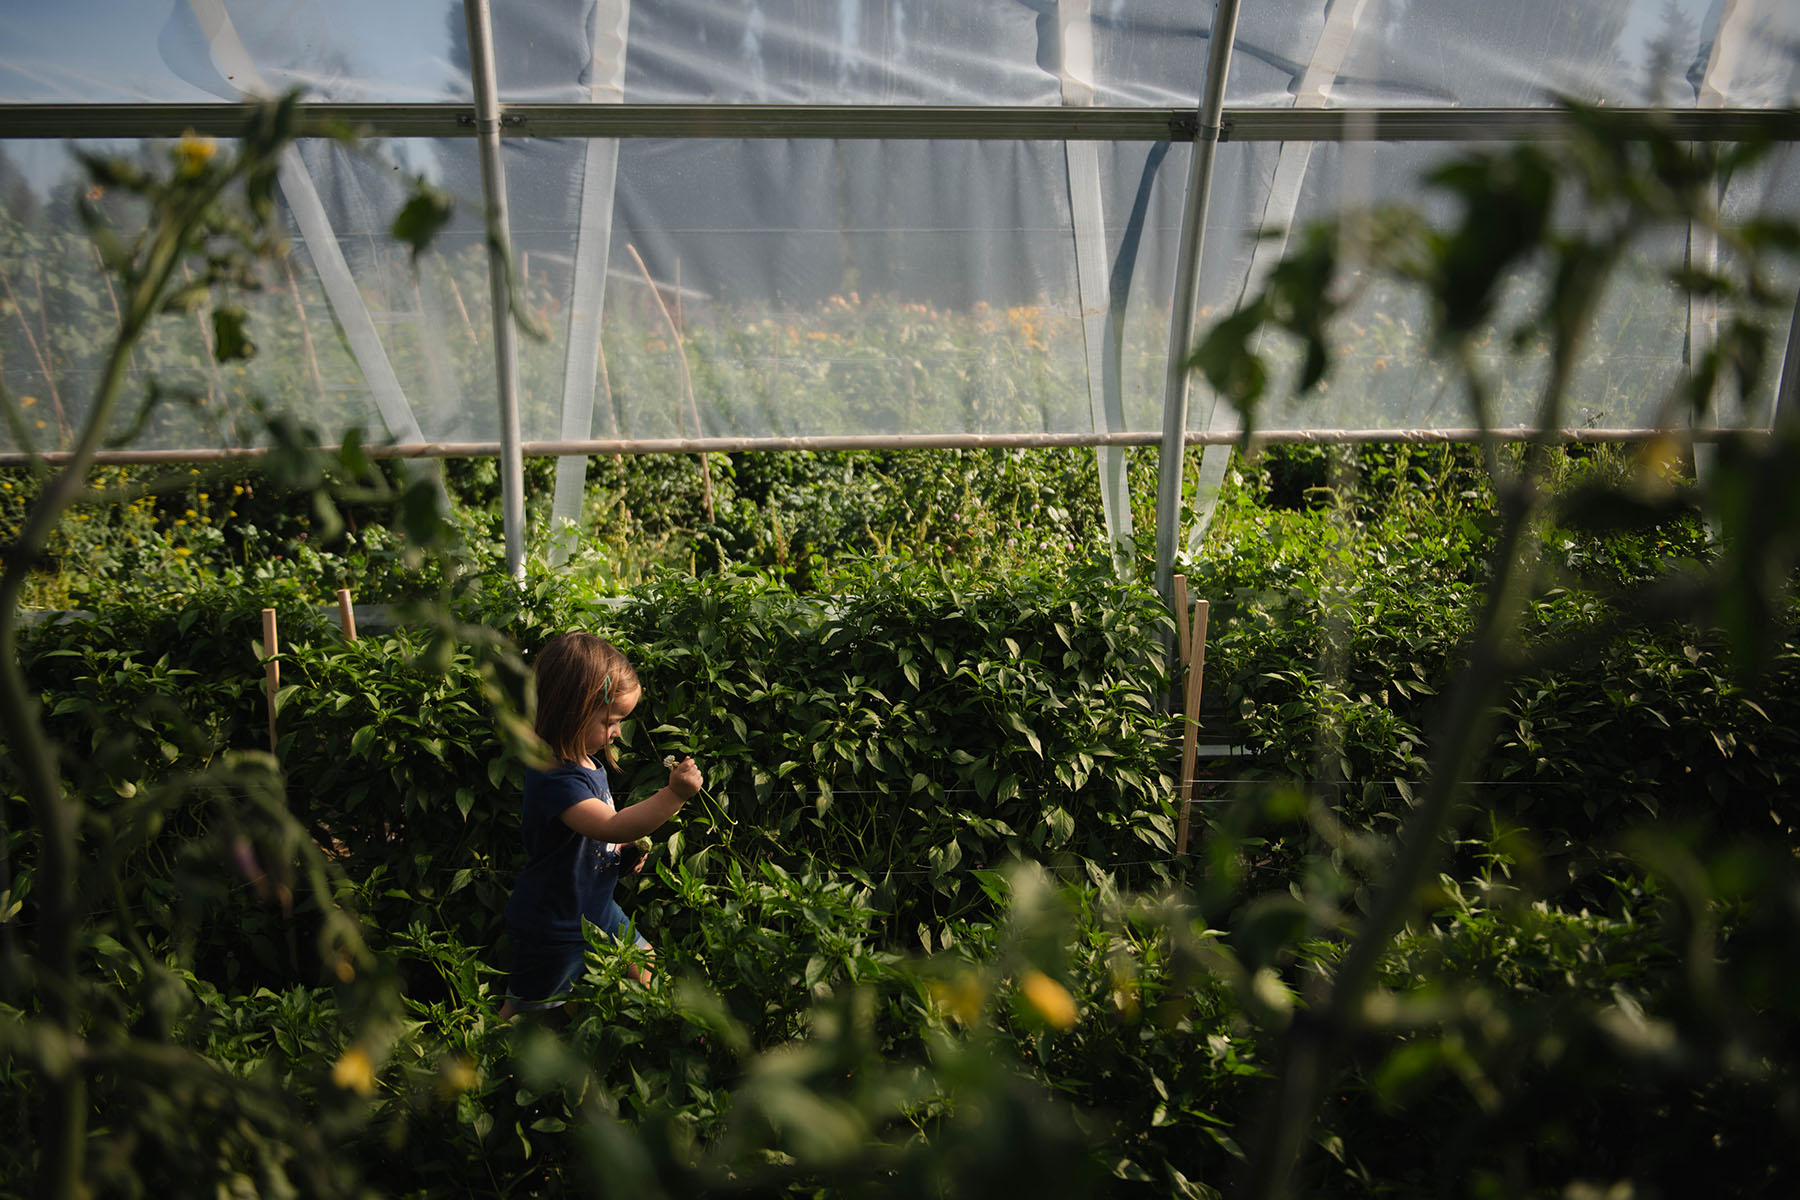 Ayla helps her parents harvest fruits and vegetables in their greenhouse.